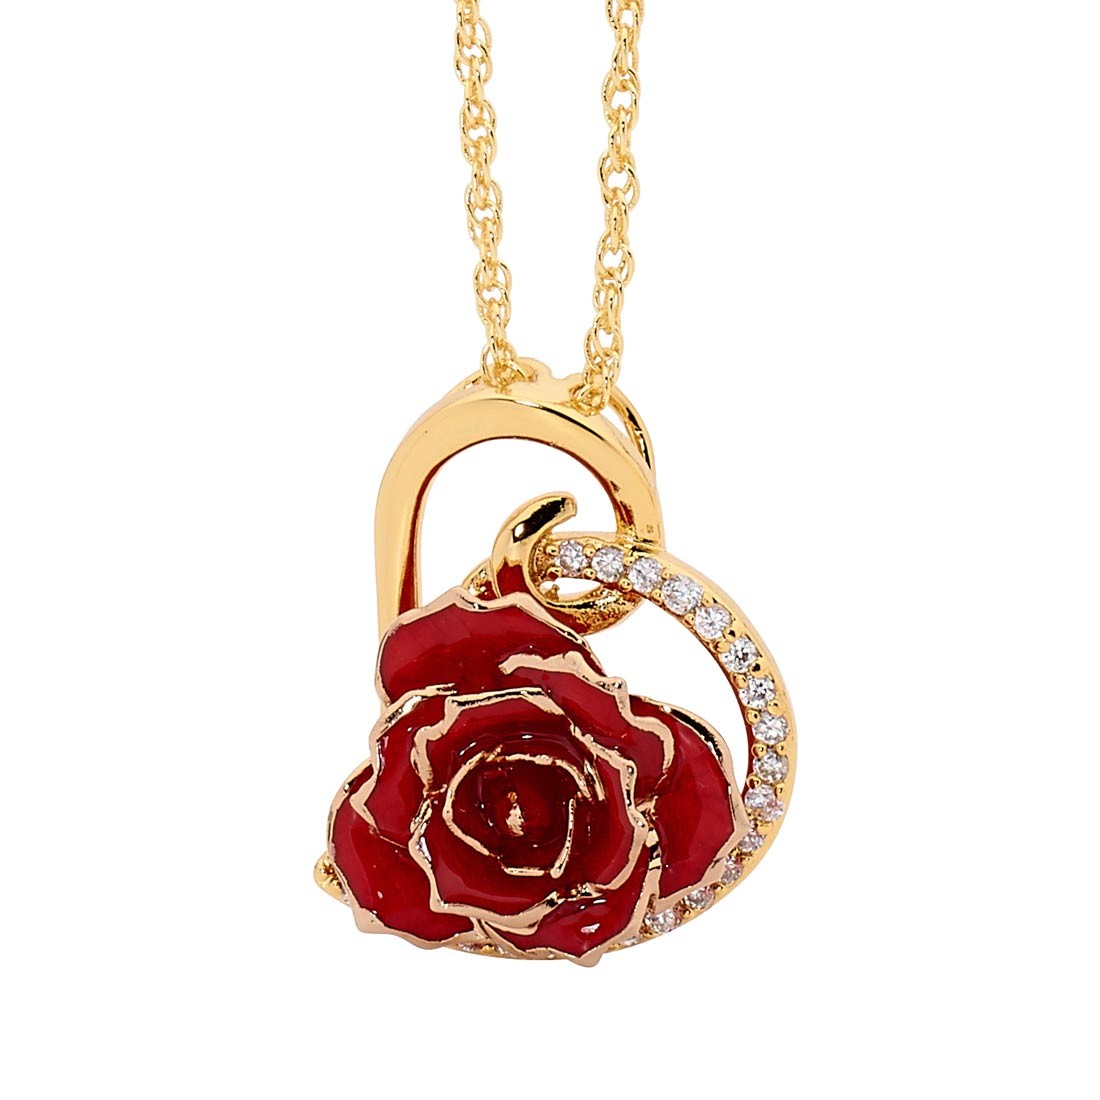 Gold Dipped Rose & Red Matched Jewelry Set in Heart Theme